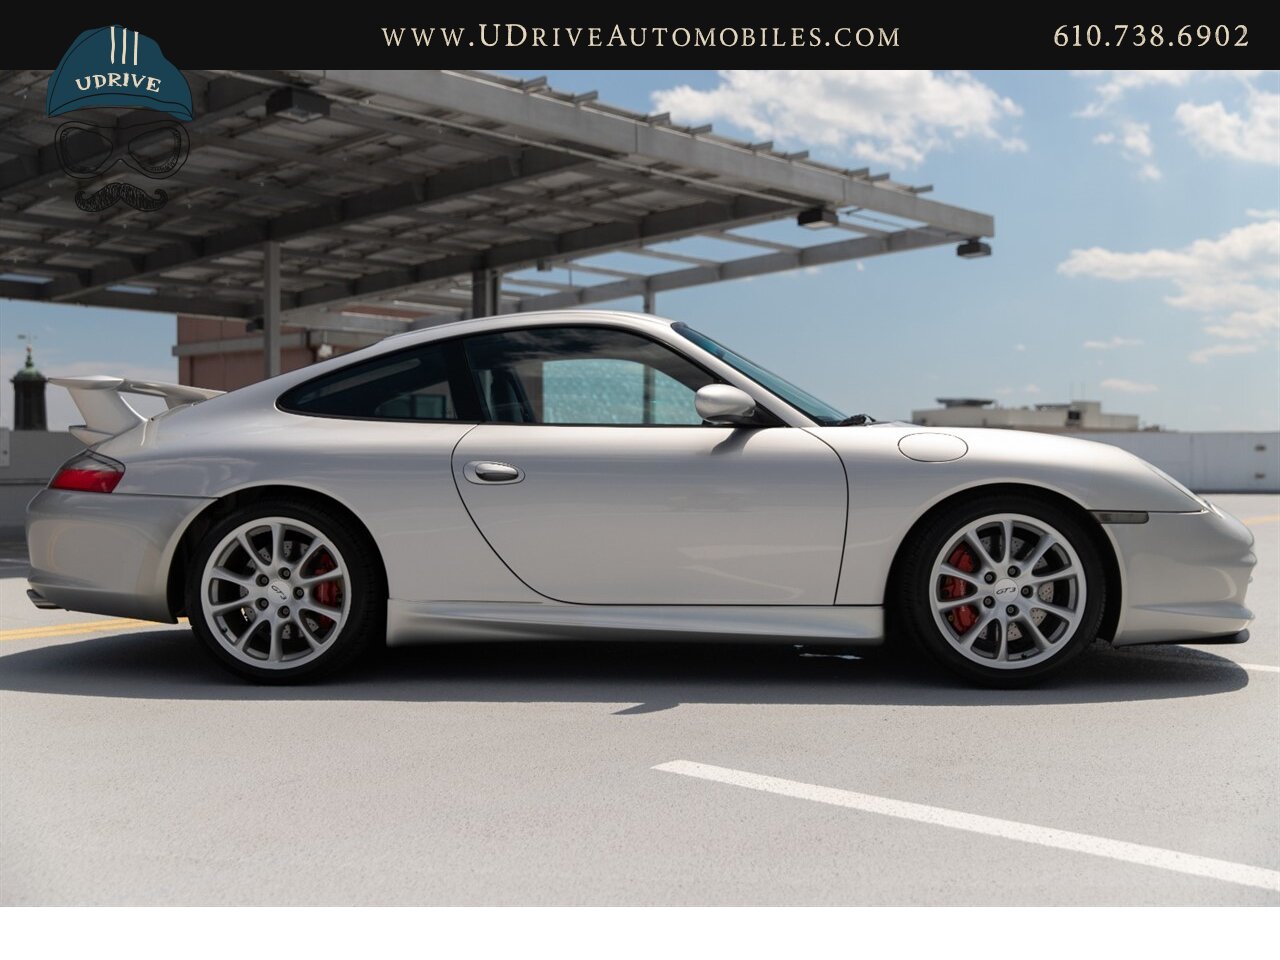 2004 Porsche 911 GT3 18k Miles Sport Seats Painted Hardback Seats  Thicker Steering Wheel Xenon Headlamps - Photo 18 - West Chester, PA 19382